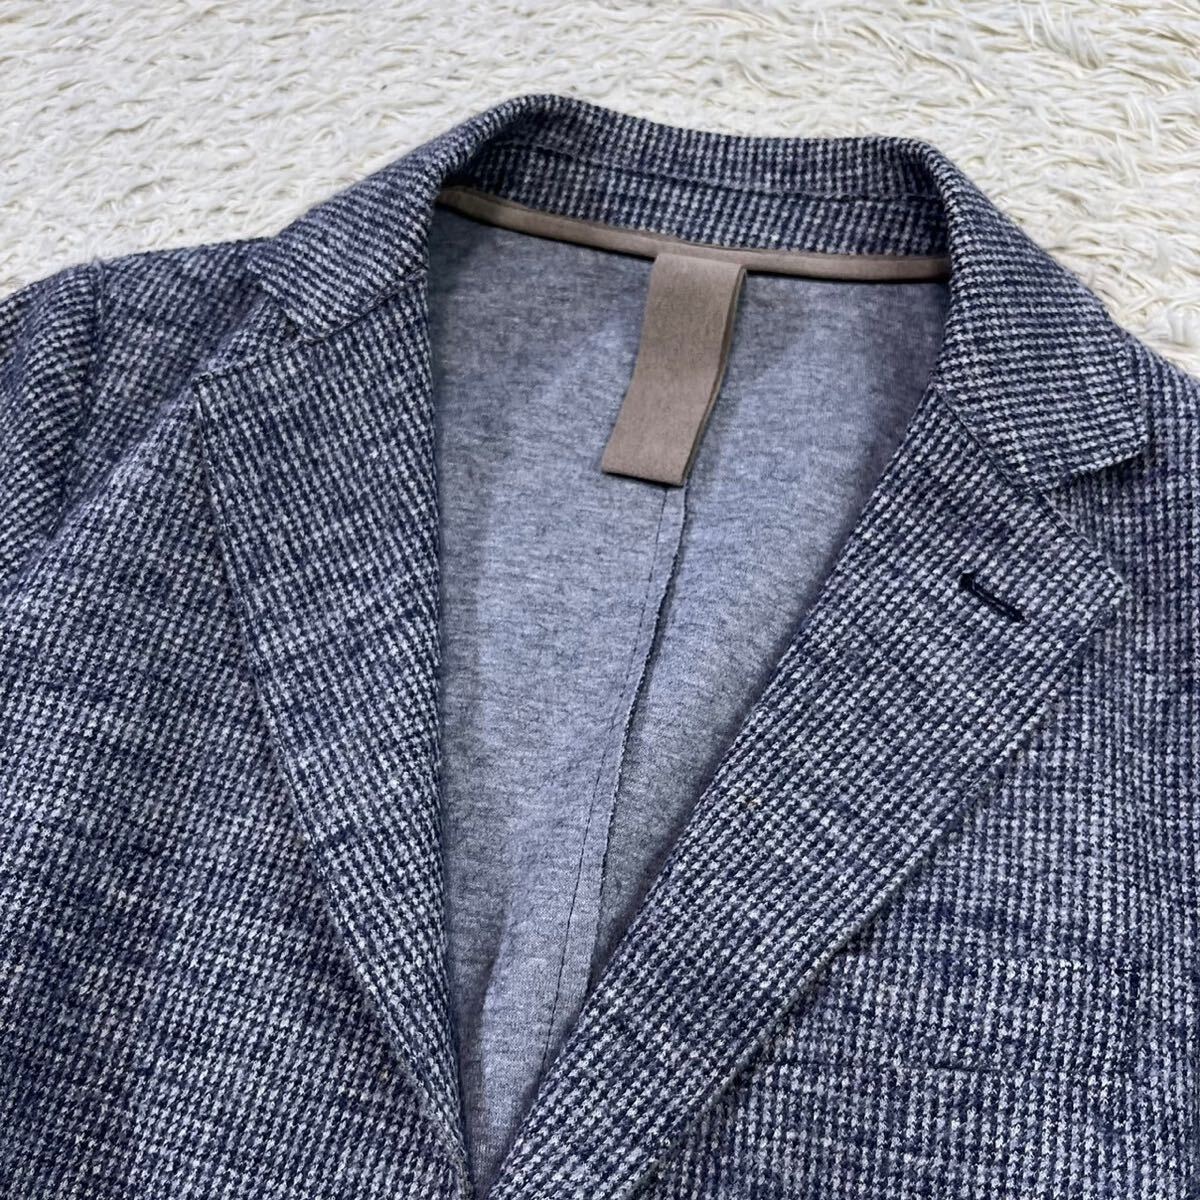  eleven ti[. height. excellent article ]eleventy tailored jacket thousand bird pattern tweed manner elbow patch gray 